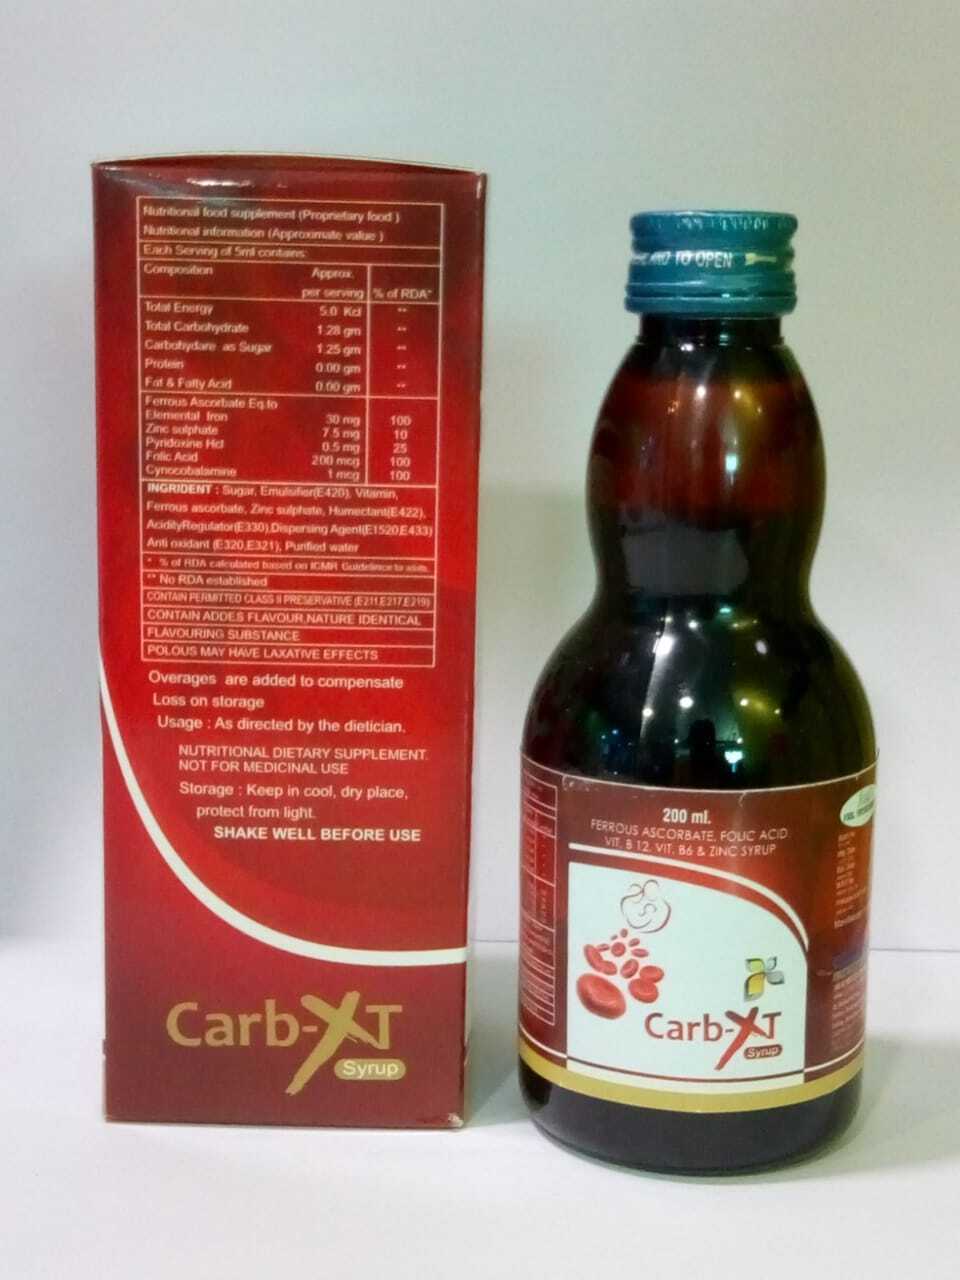 Carb-XT Syrup